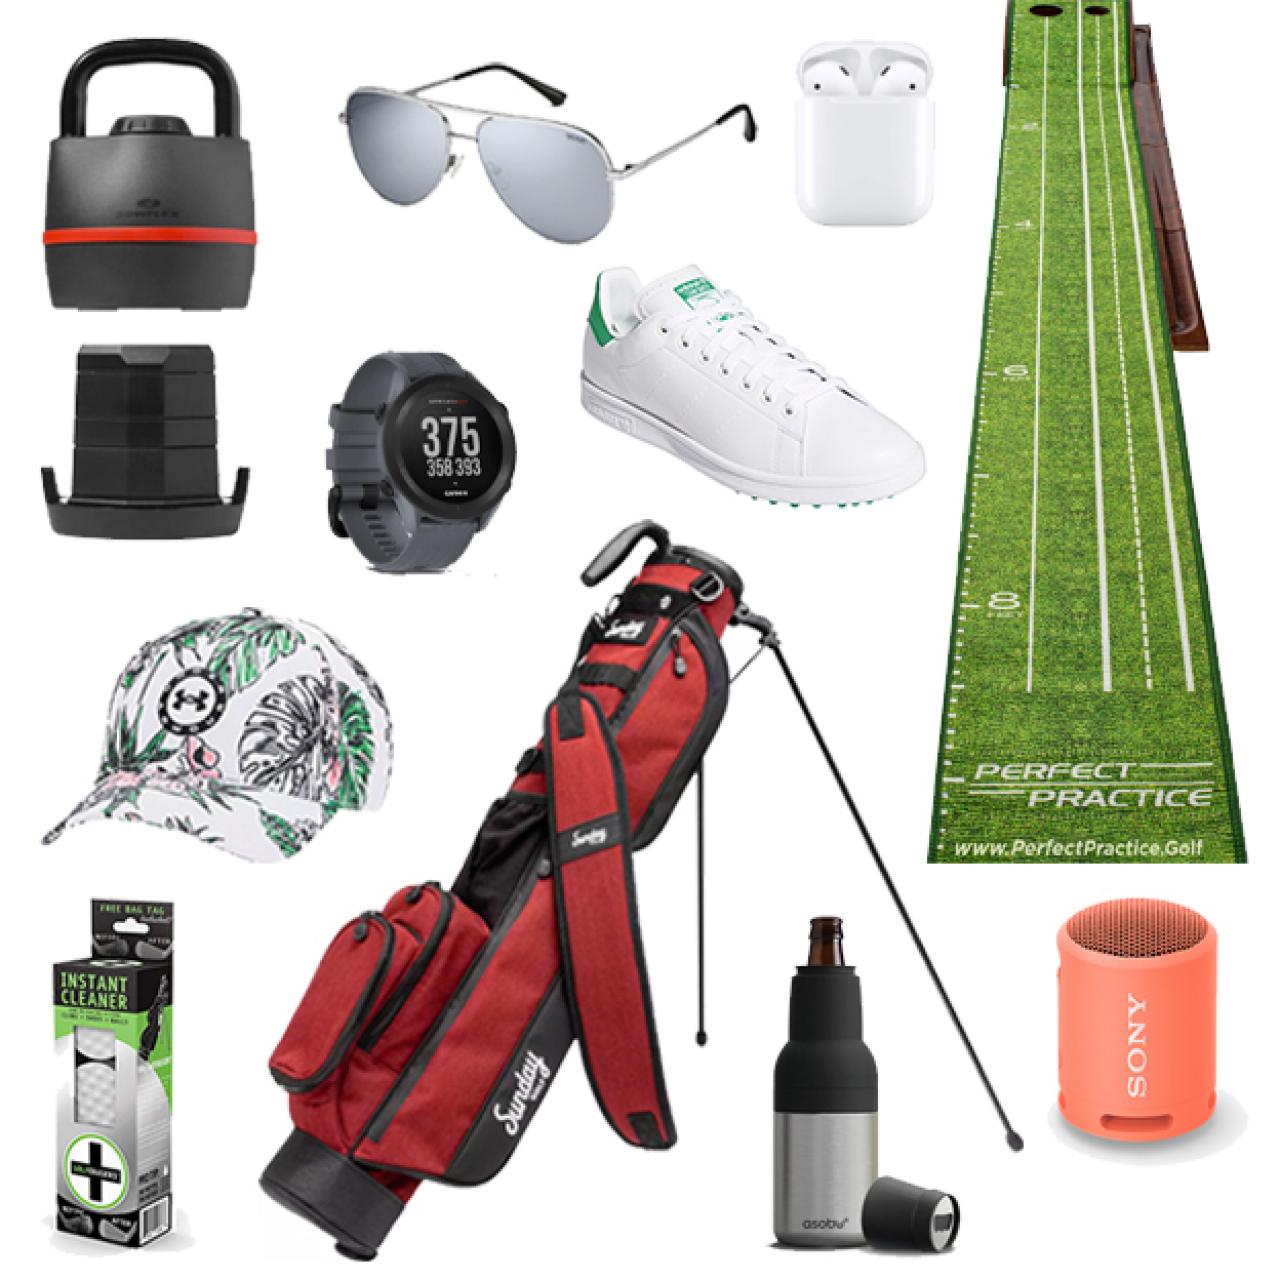 Father's Day gifts 2021: The ultimate guide to work-from-home golf gifts  for dad, Golf Equipment: Clubs, Balls, Bags